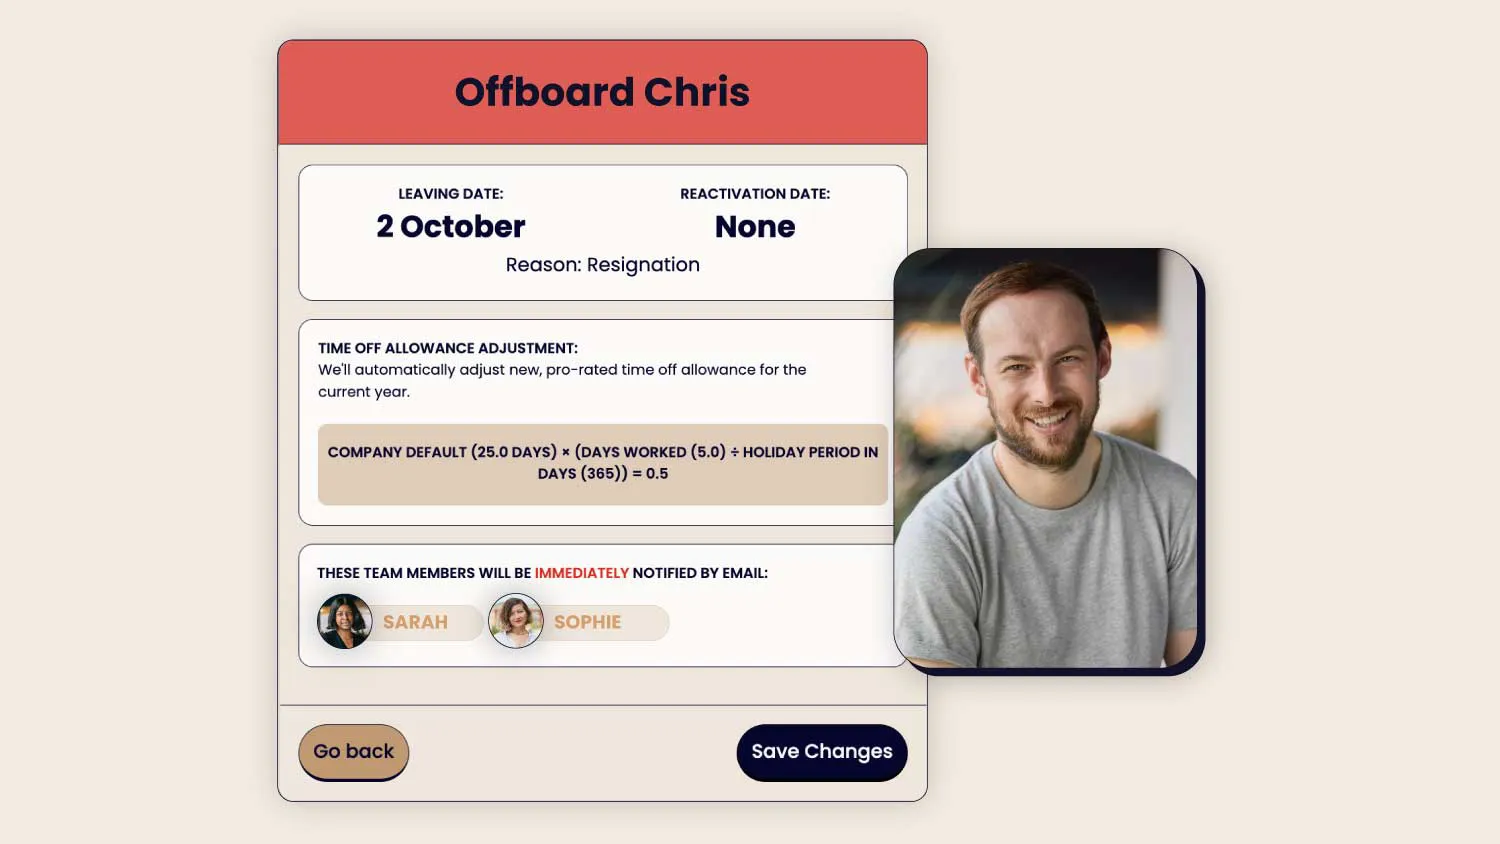 Sign up for a free 7-day trial today to get your offboarding and all your HR admin sorted. 